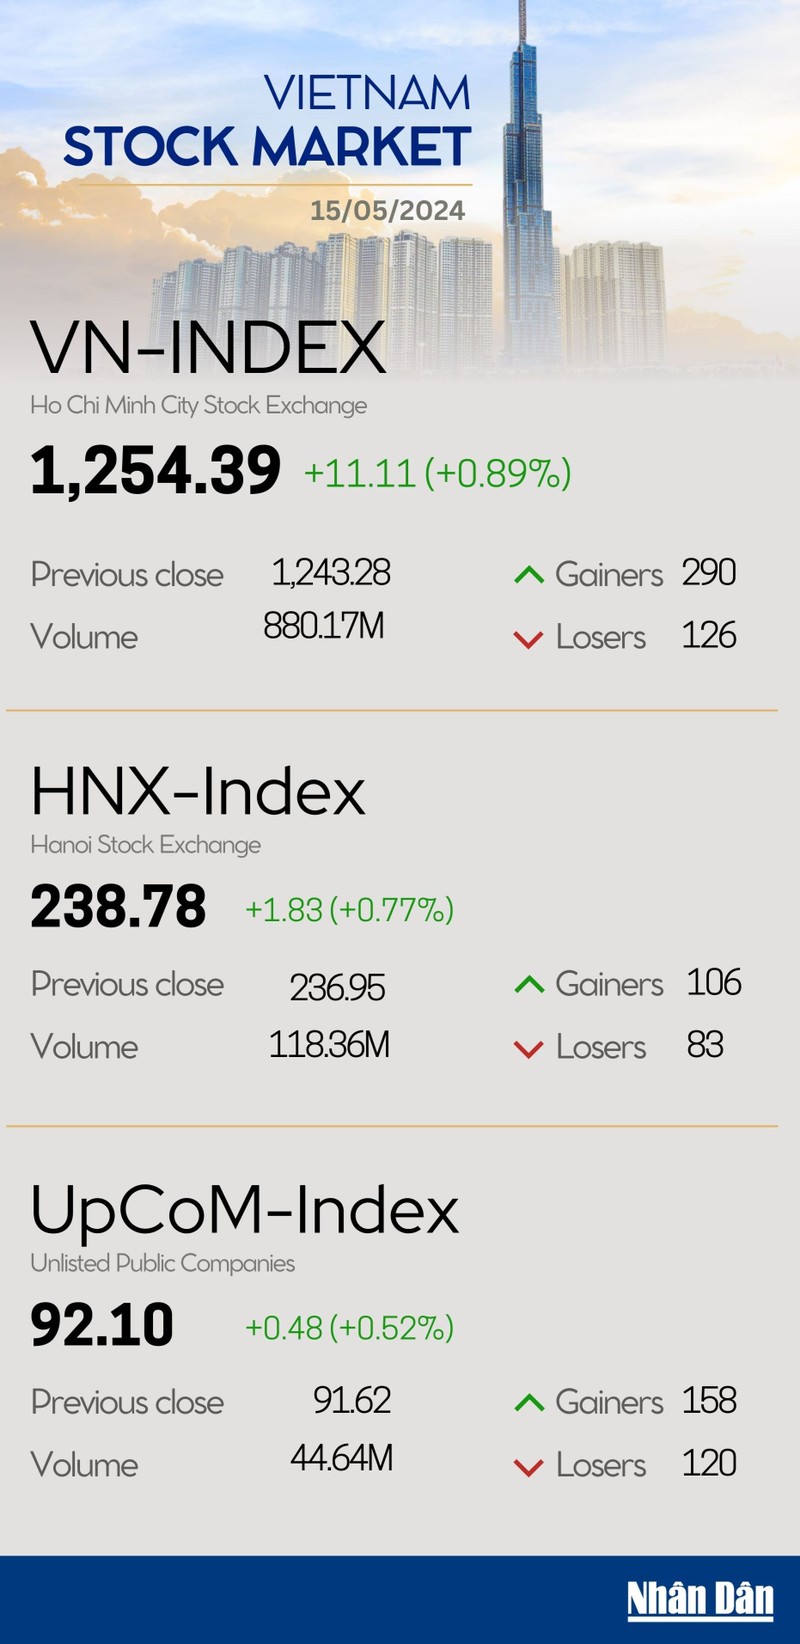 Infographic: VN-Index rises 0.89% on May 15